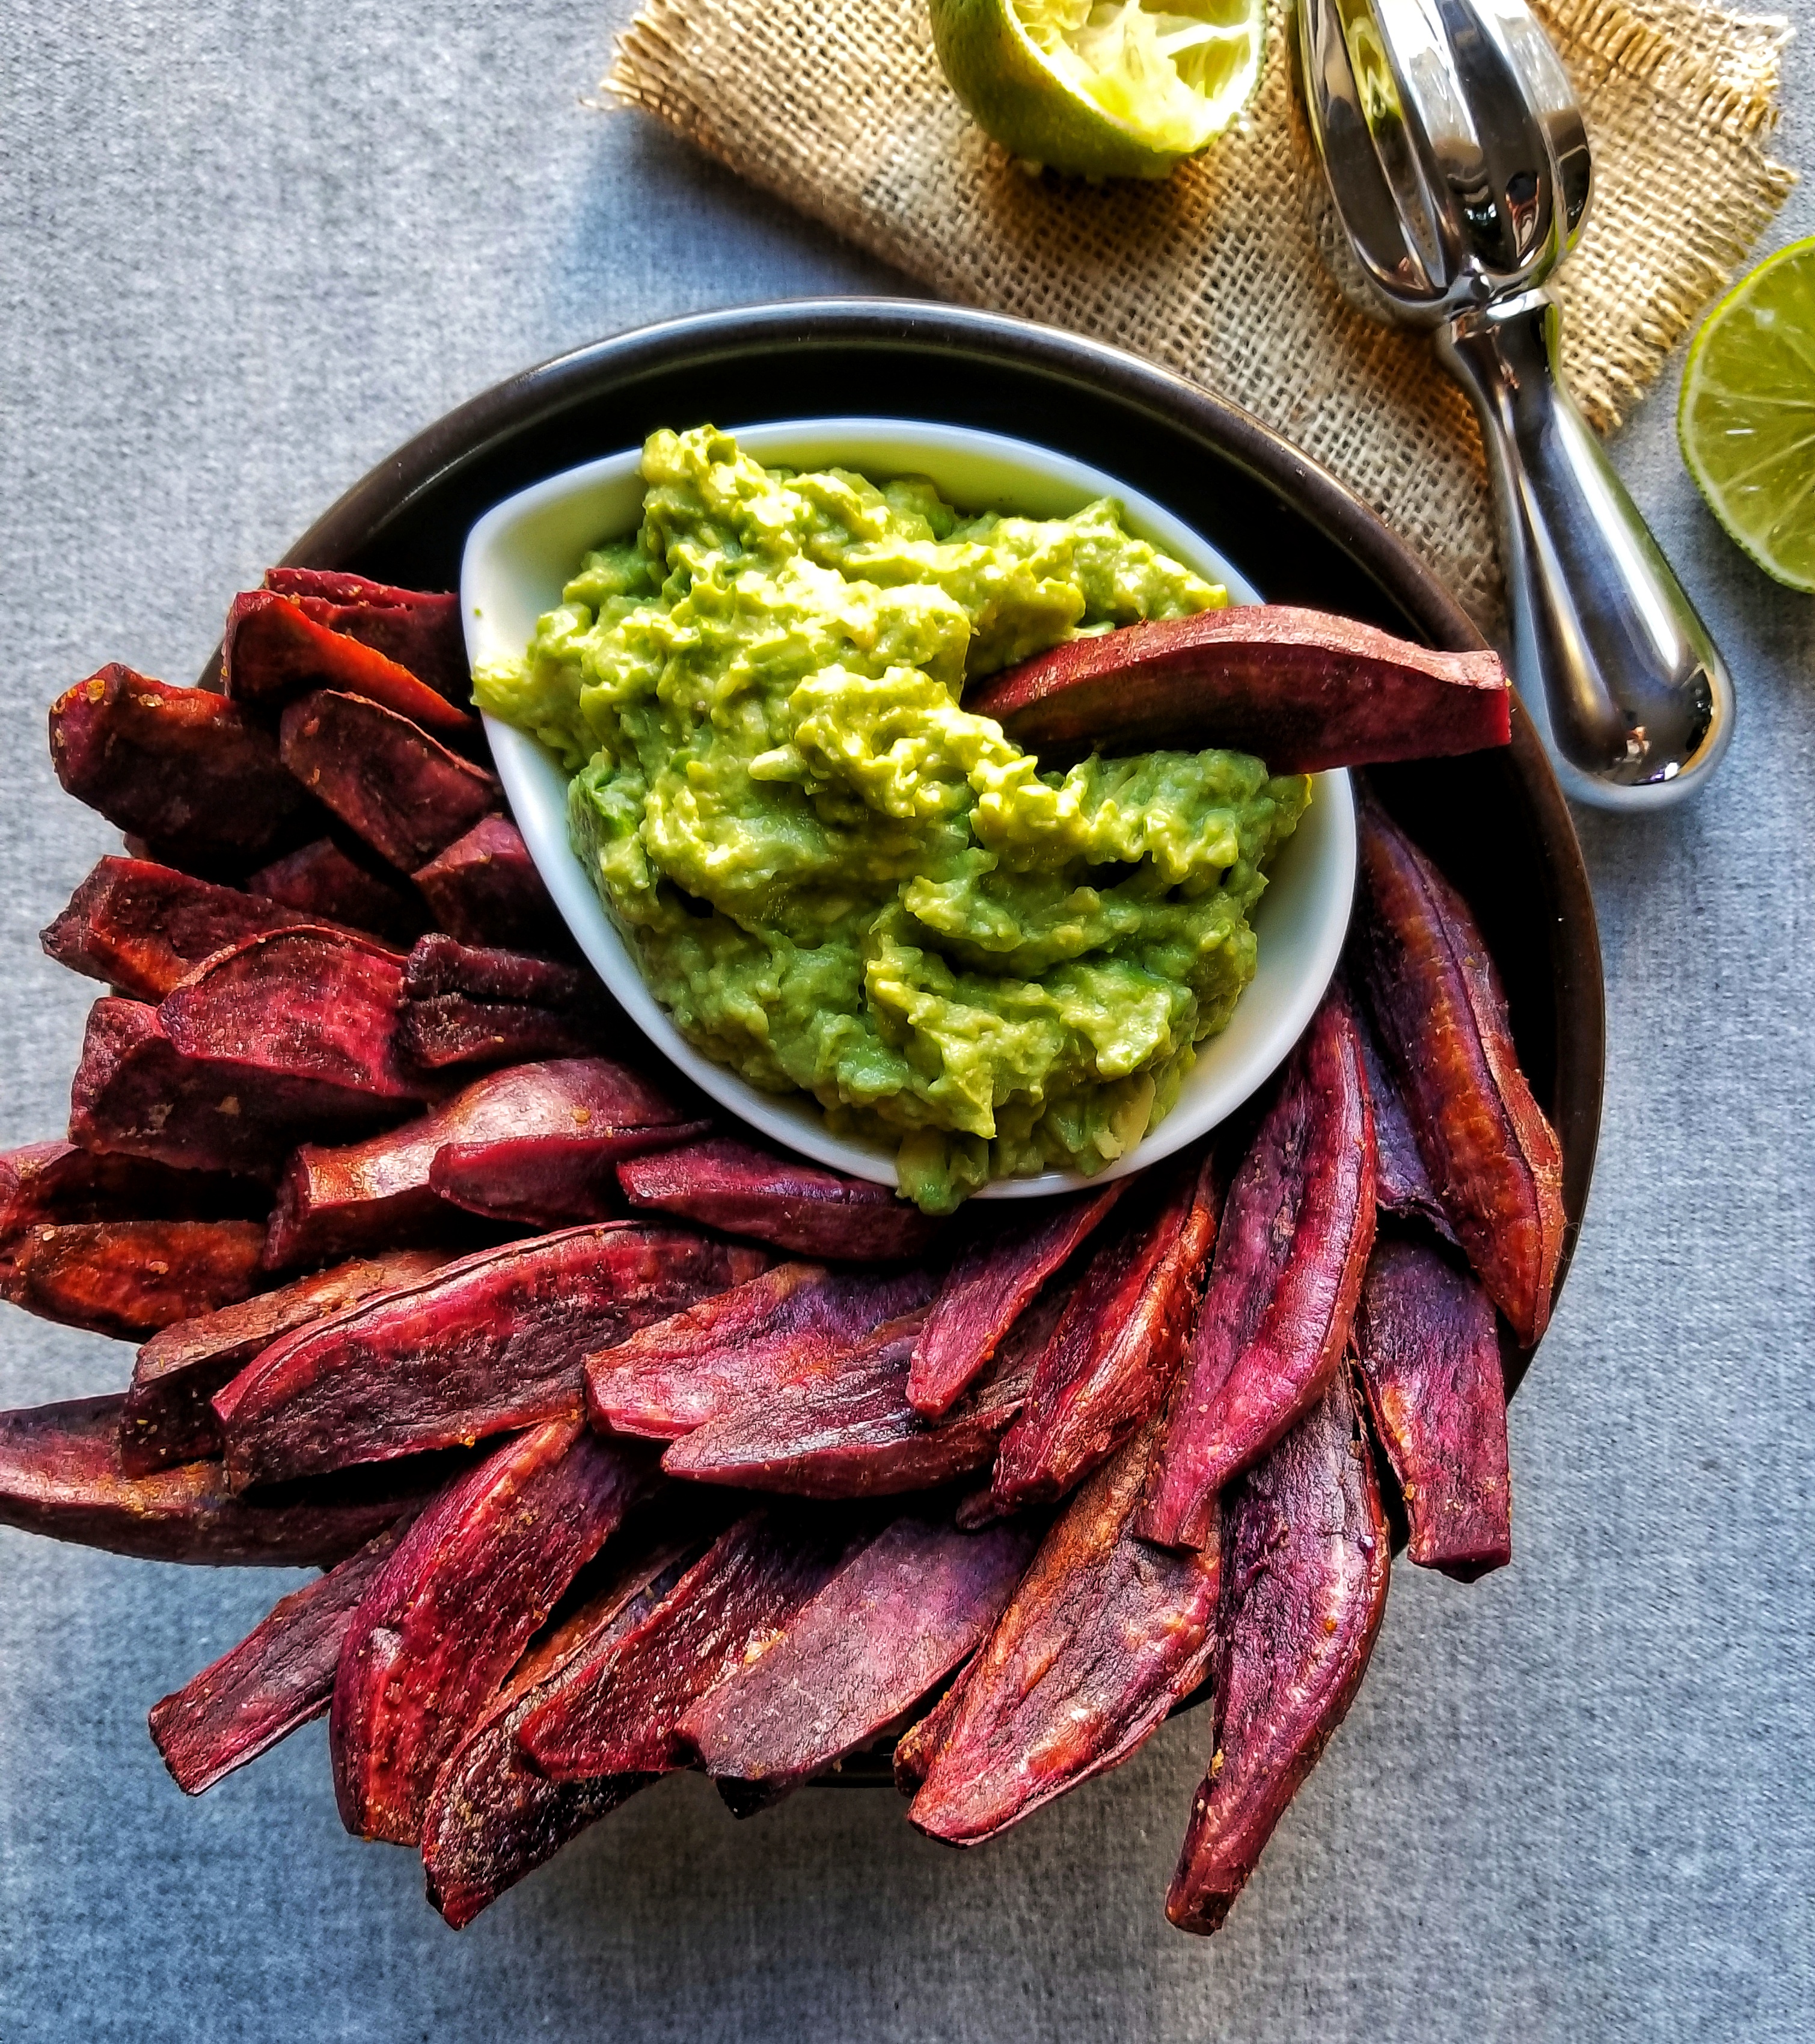 purple sweet potato wedges in a black bowl with guacamole